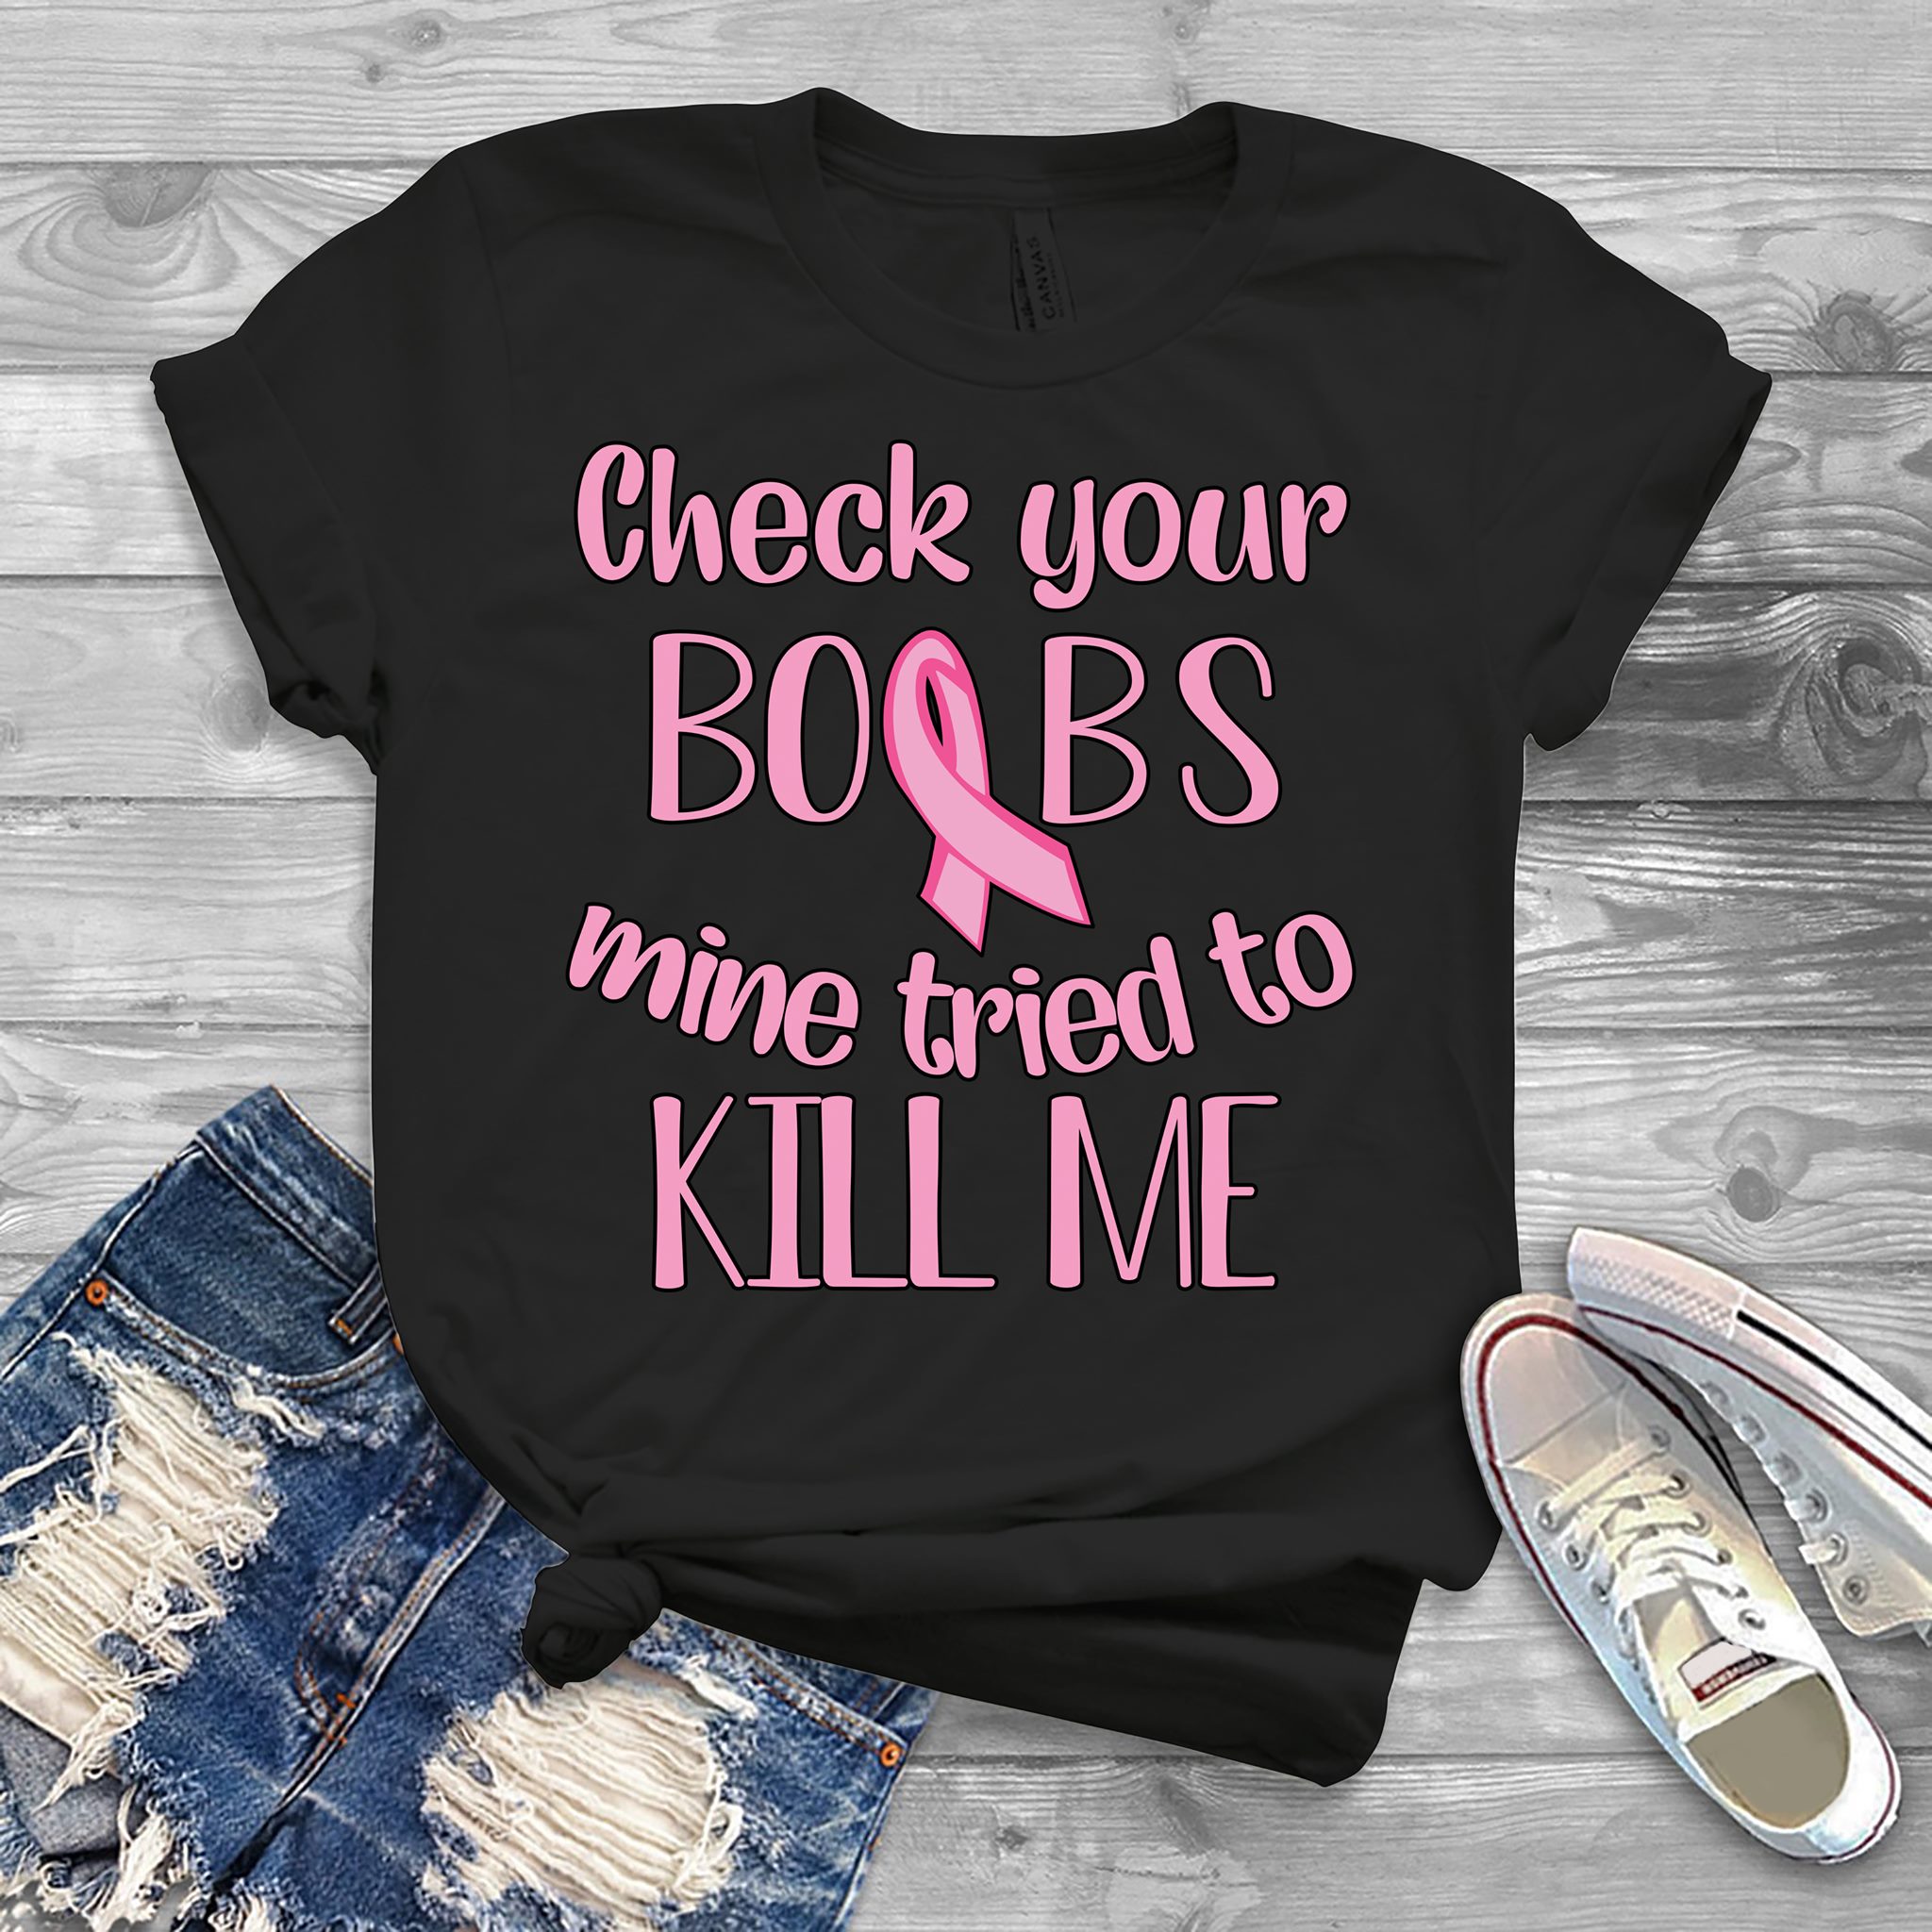 Check your boobs mine tried to kill me - breast cancer awareness